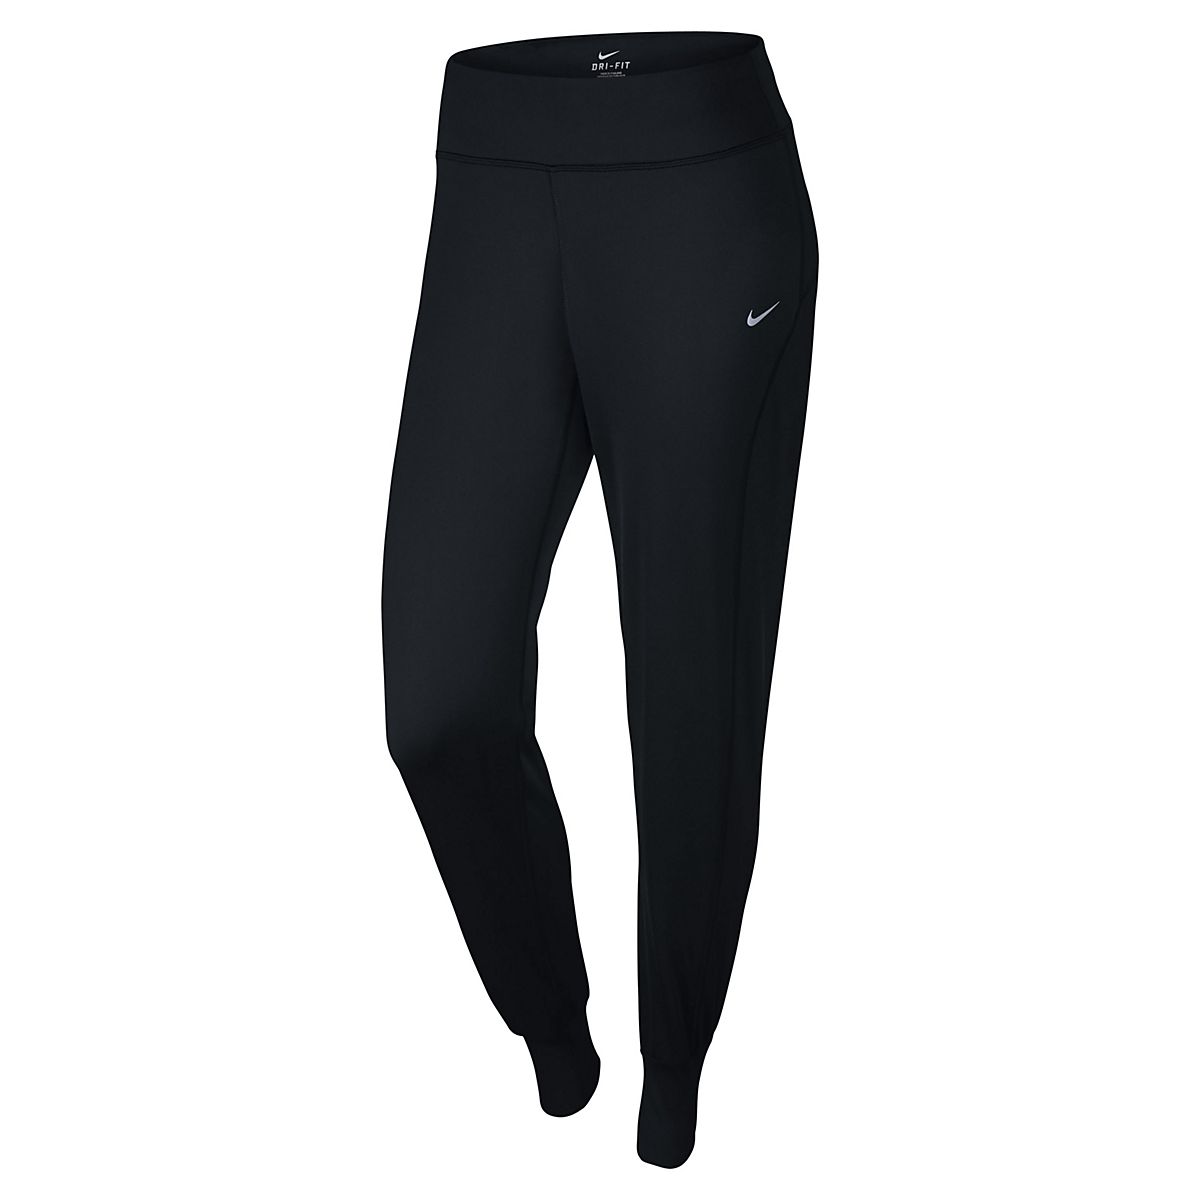 Nike Women's Dri-FIT Thermal Running Pant | Academy